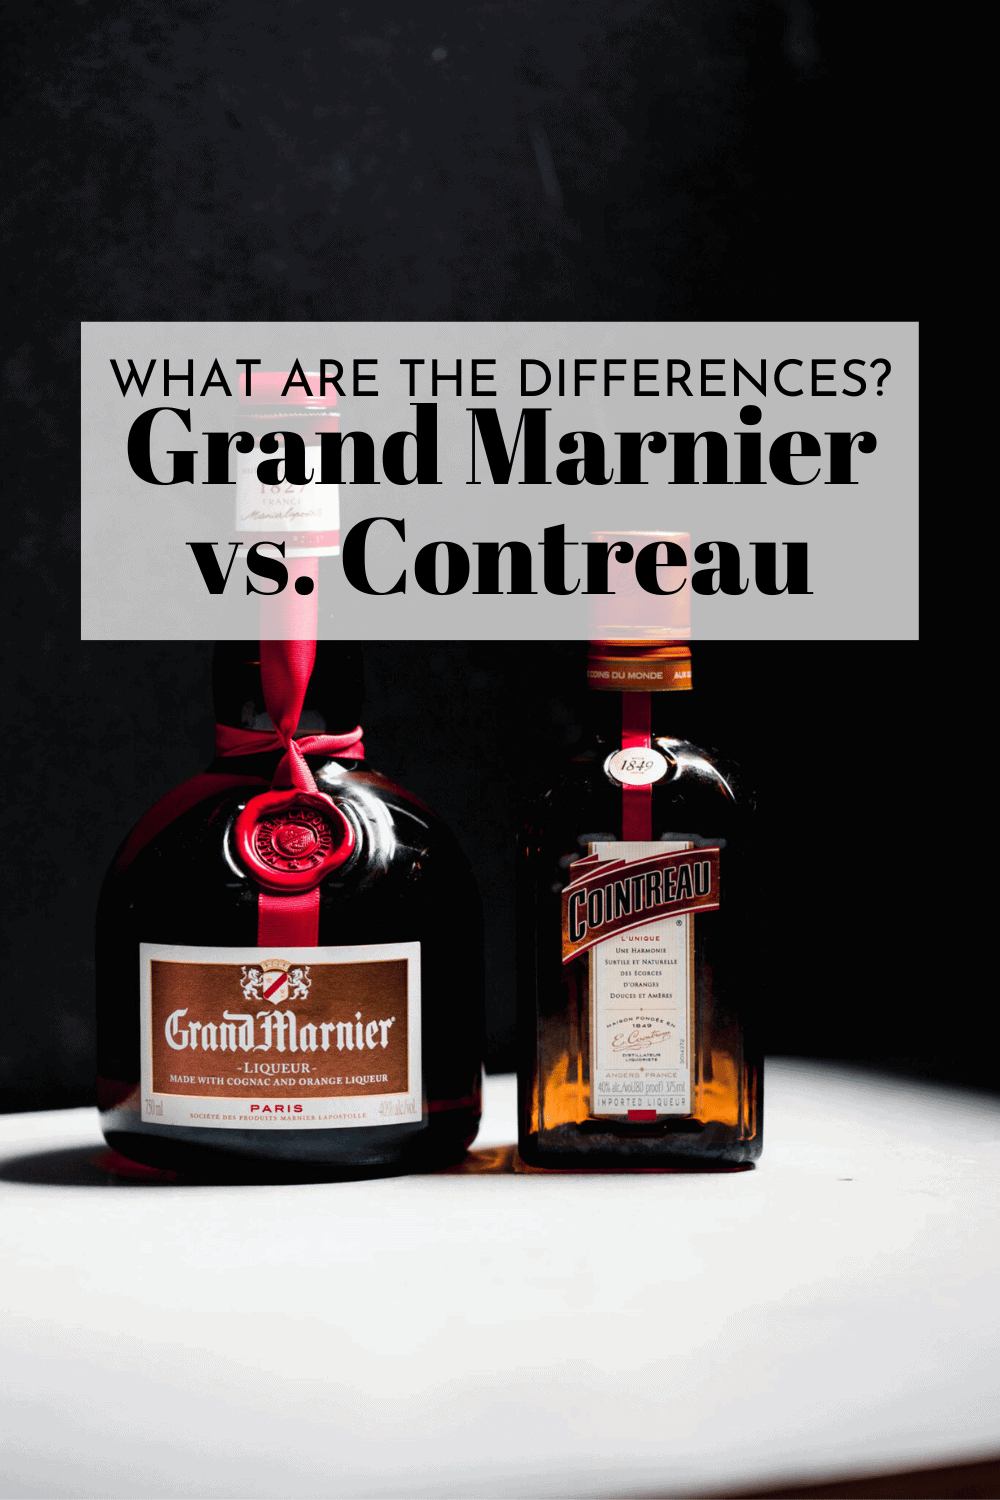 Bottle of Grand Marnier next to bottle of Cointreau with text overlay.